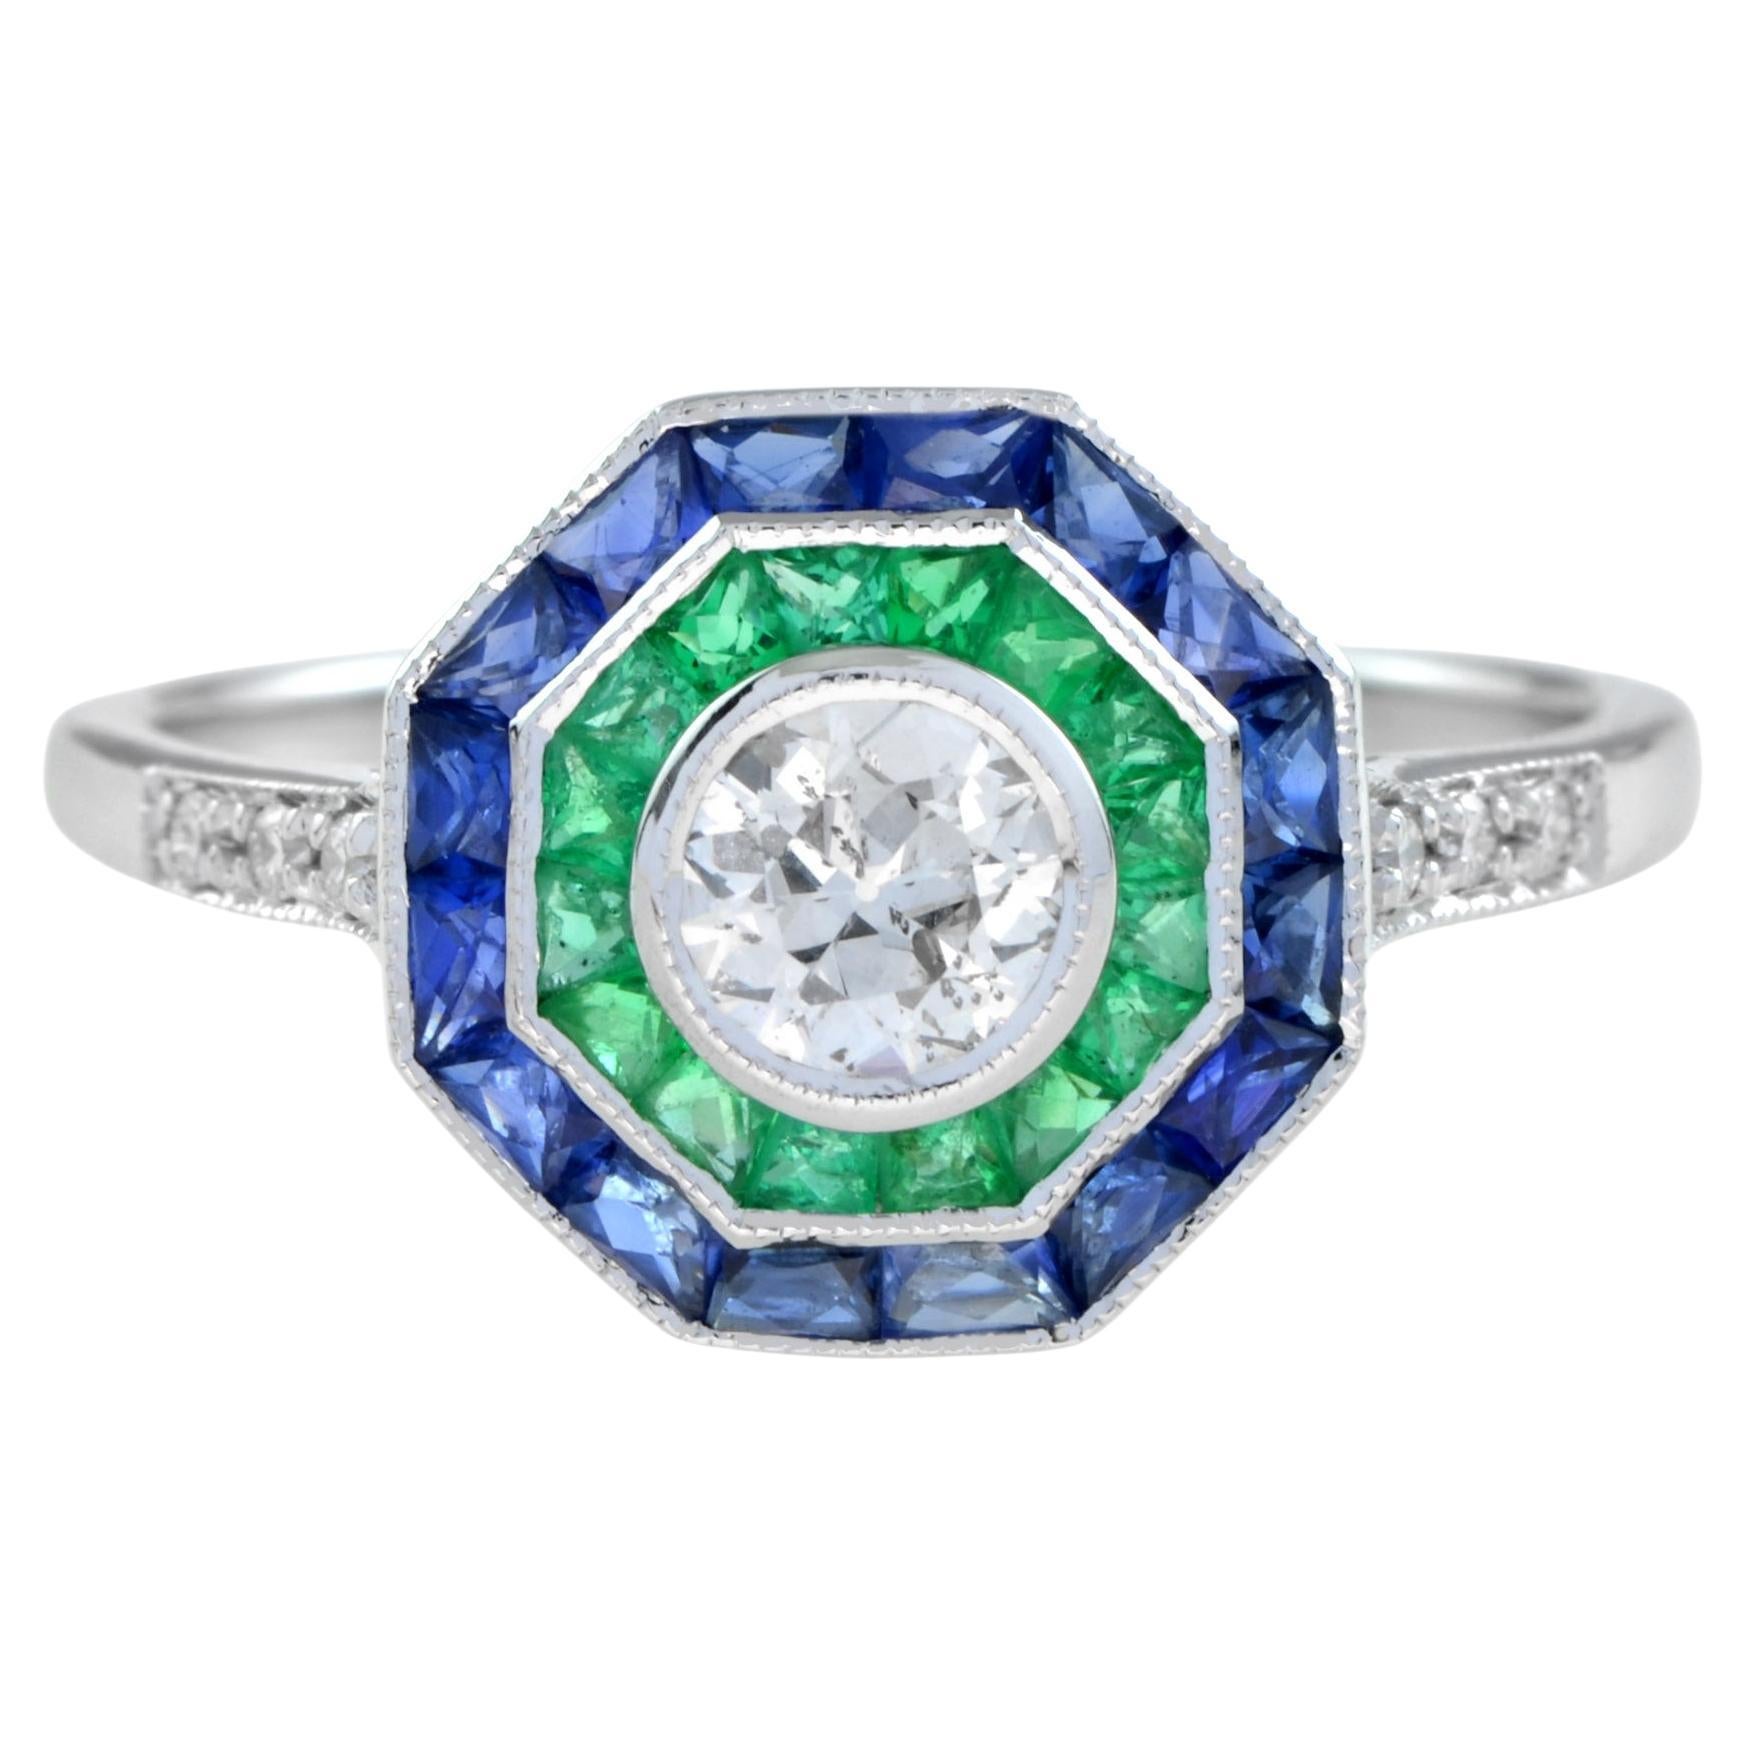 Art Deco Style Diamond with Sapphire and Emerald Engagement Ring in 18K Gold